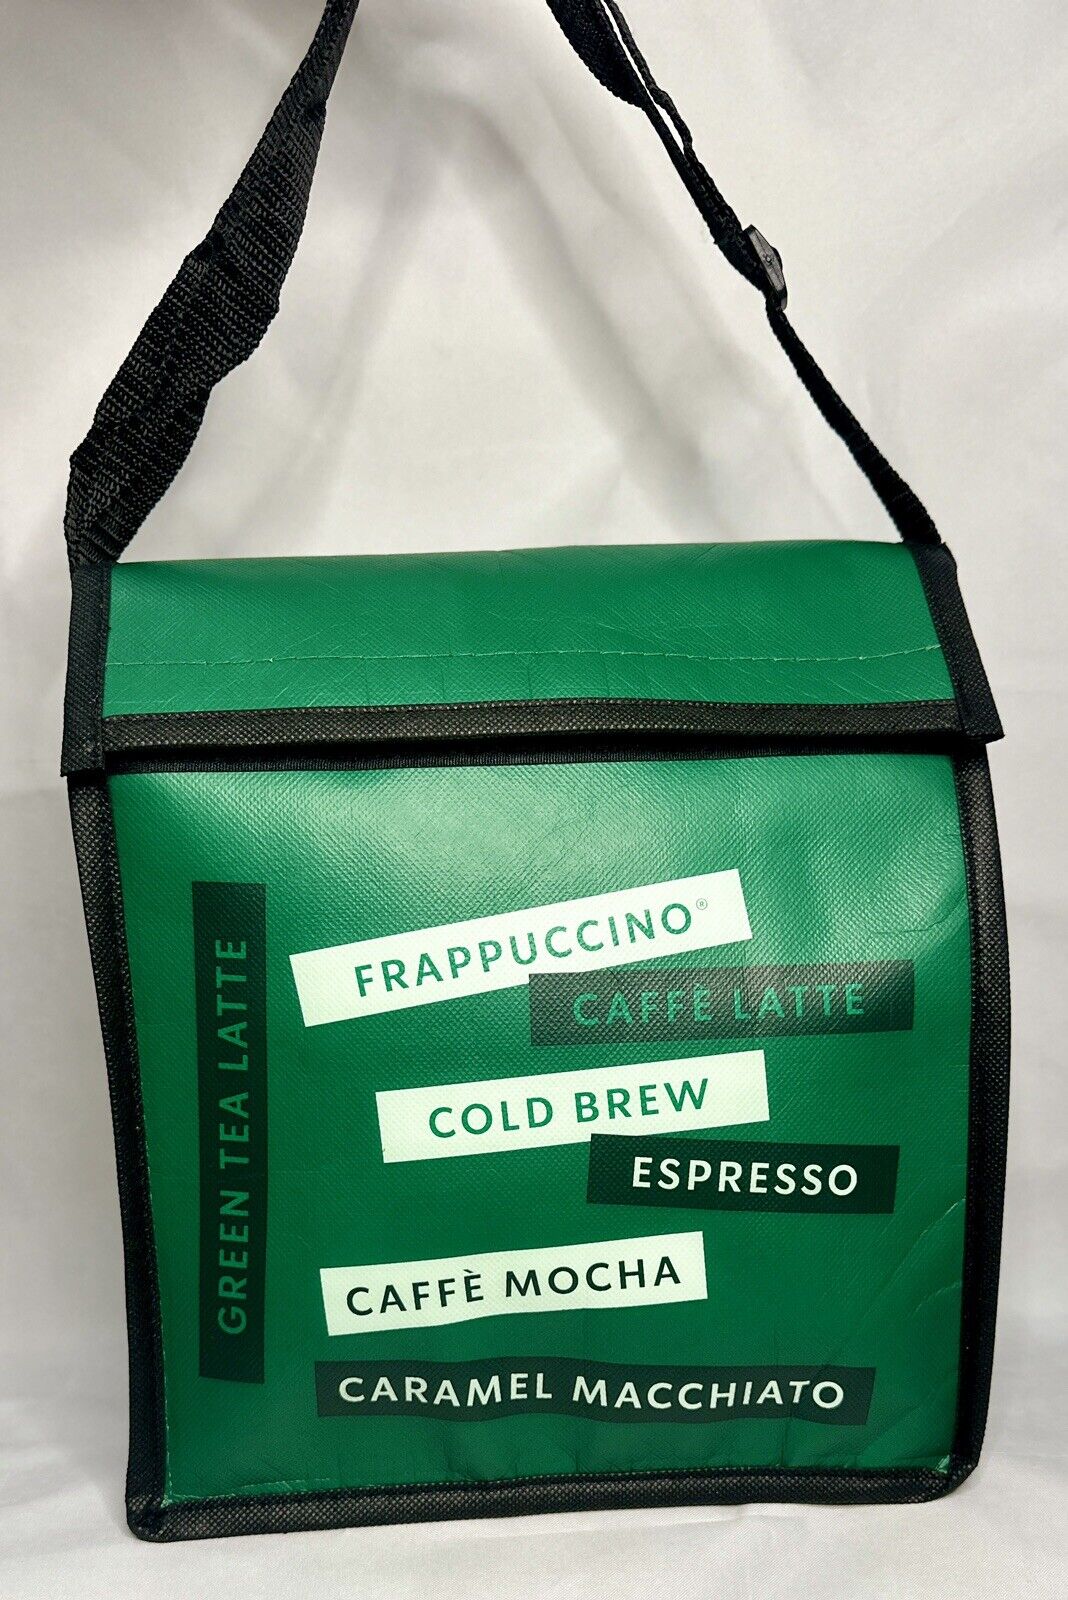 Starbucks Malaysia Jual Insulated Green Cooler Bag With Carrying Handle 11x10x5”